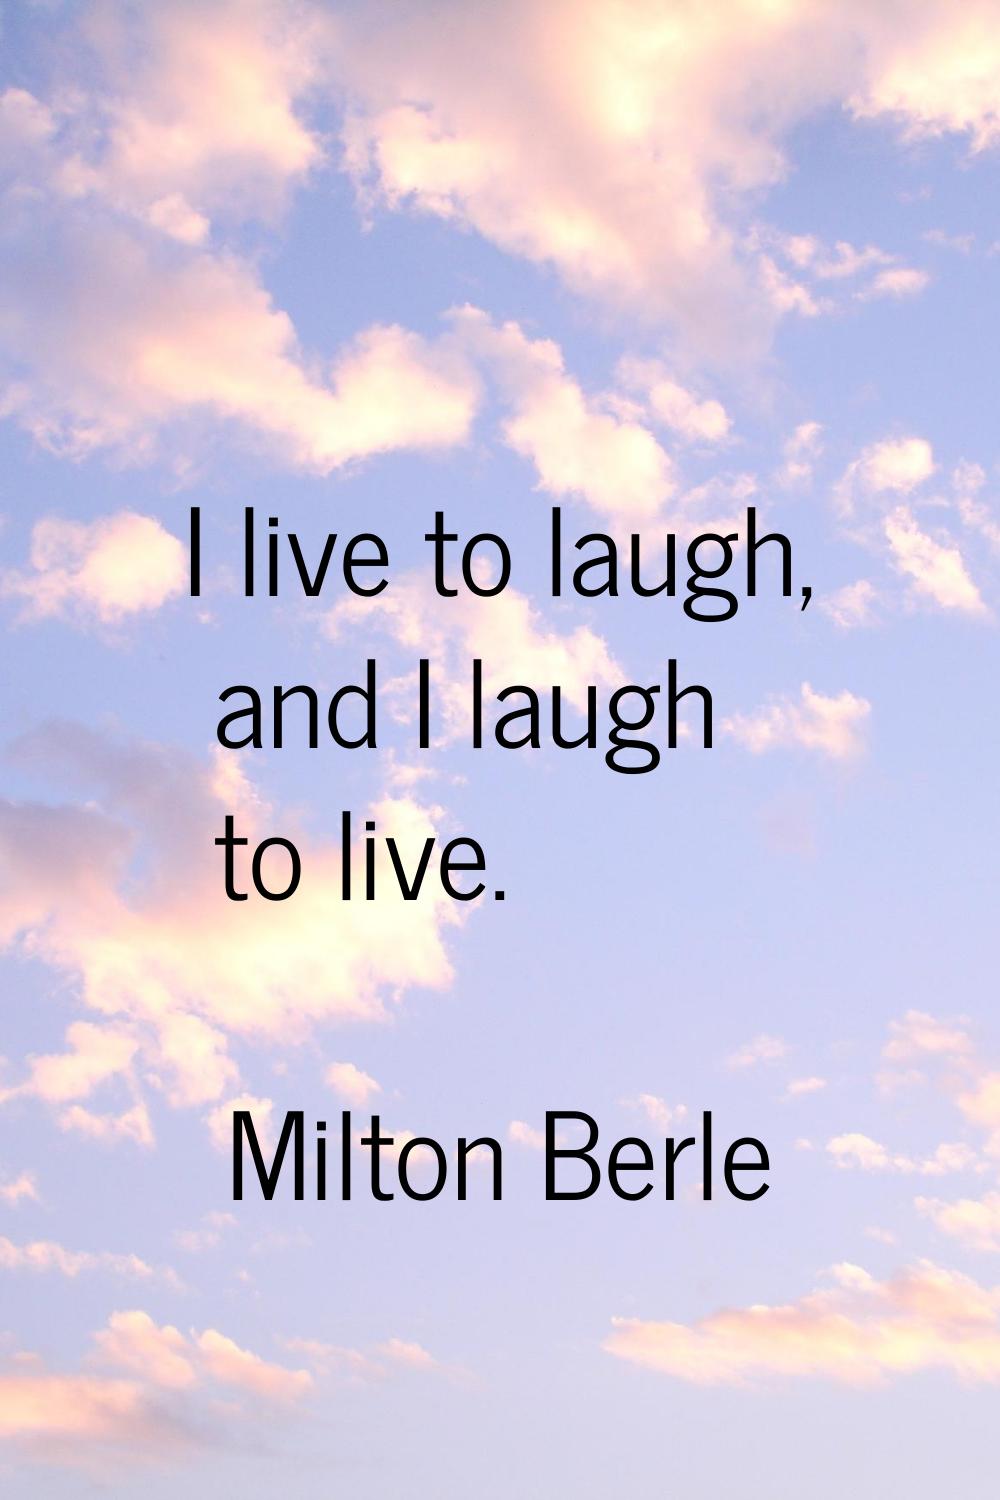 I live to laugh, and I laugh to live.